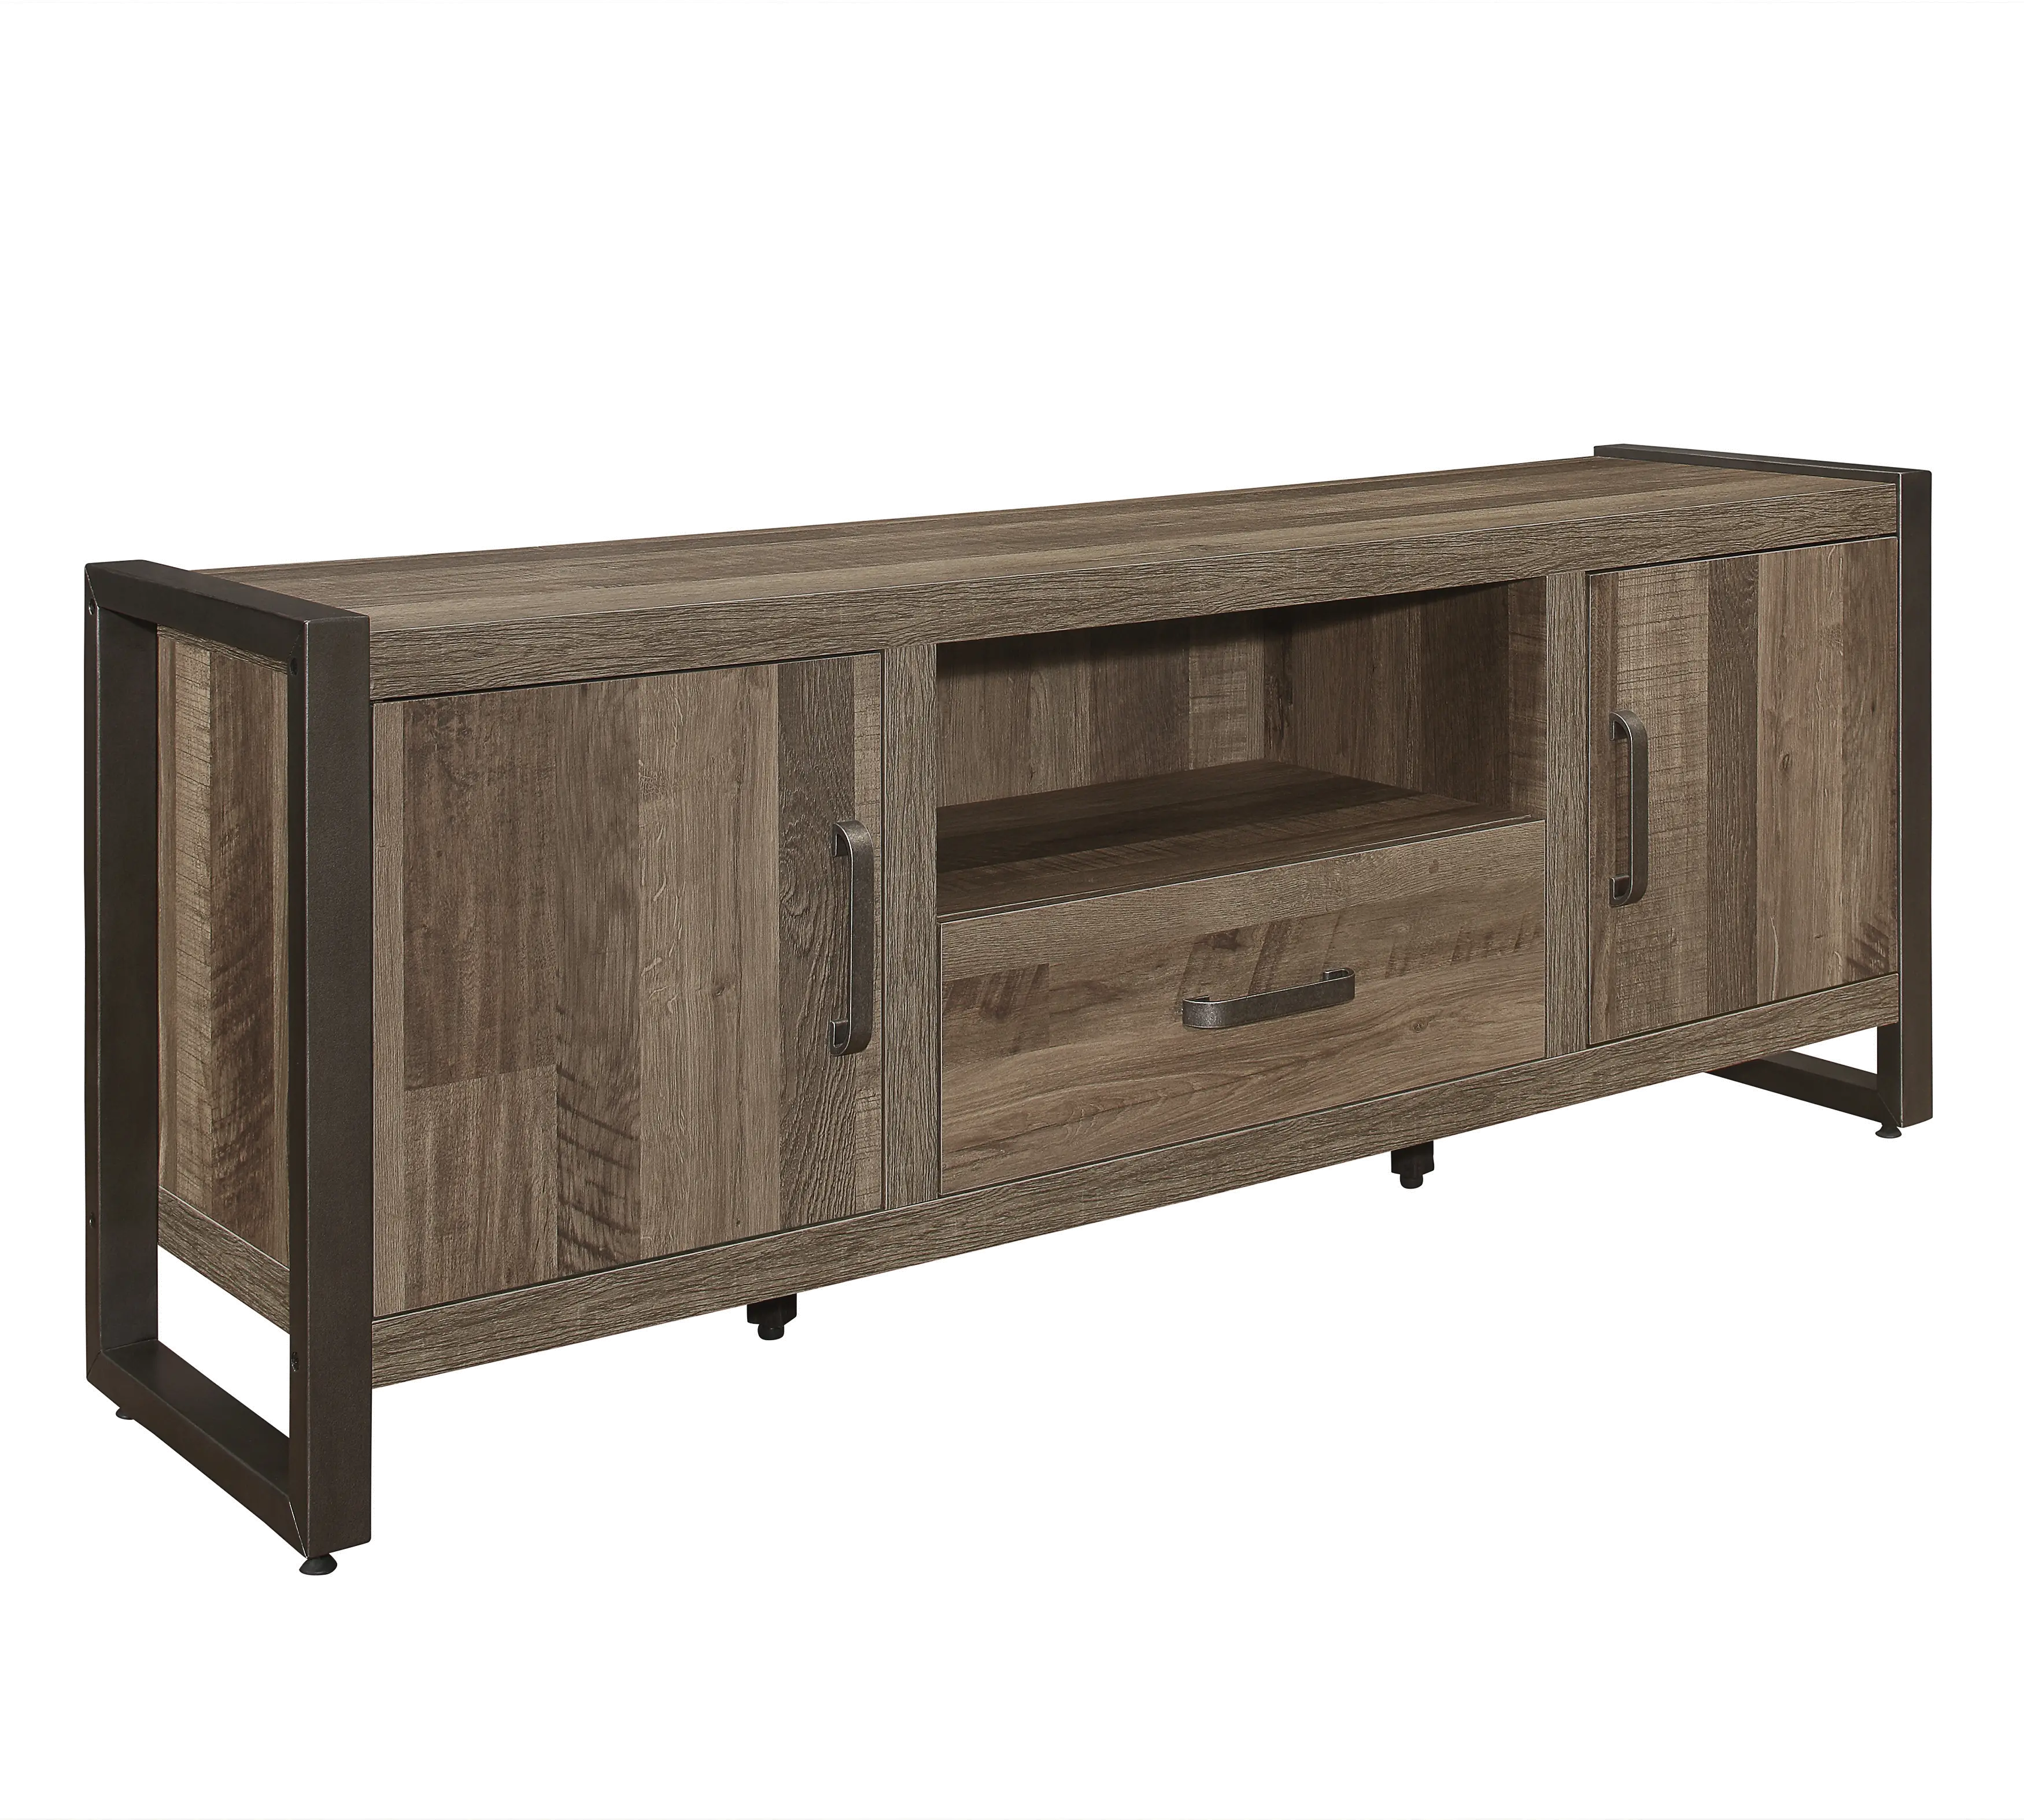 Duane 63" Two-Tone Brown and Gunmetal Tv Stand